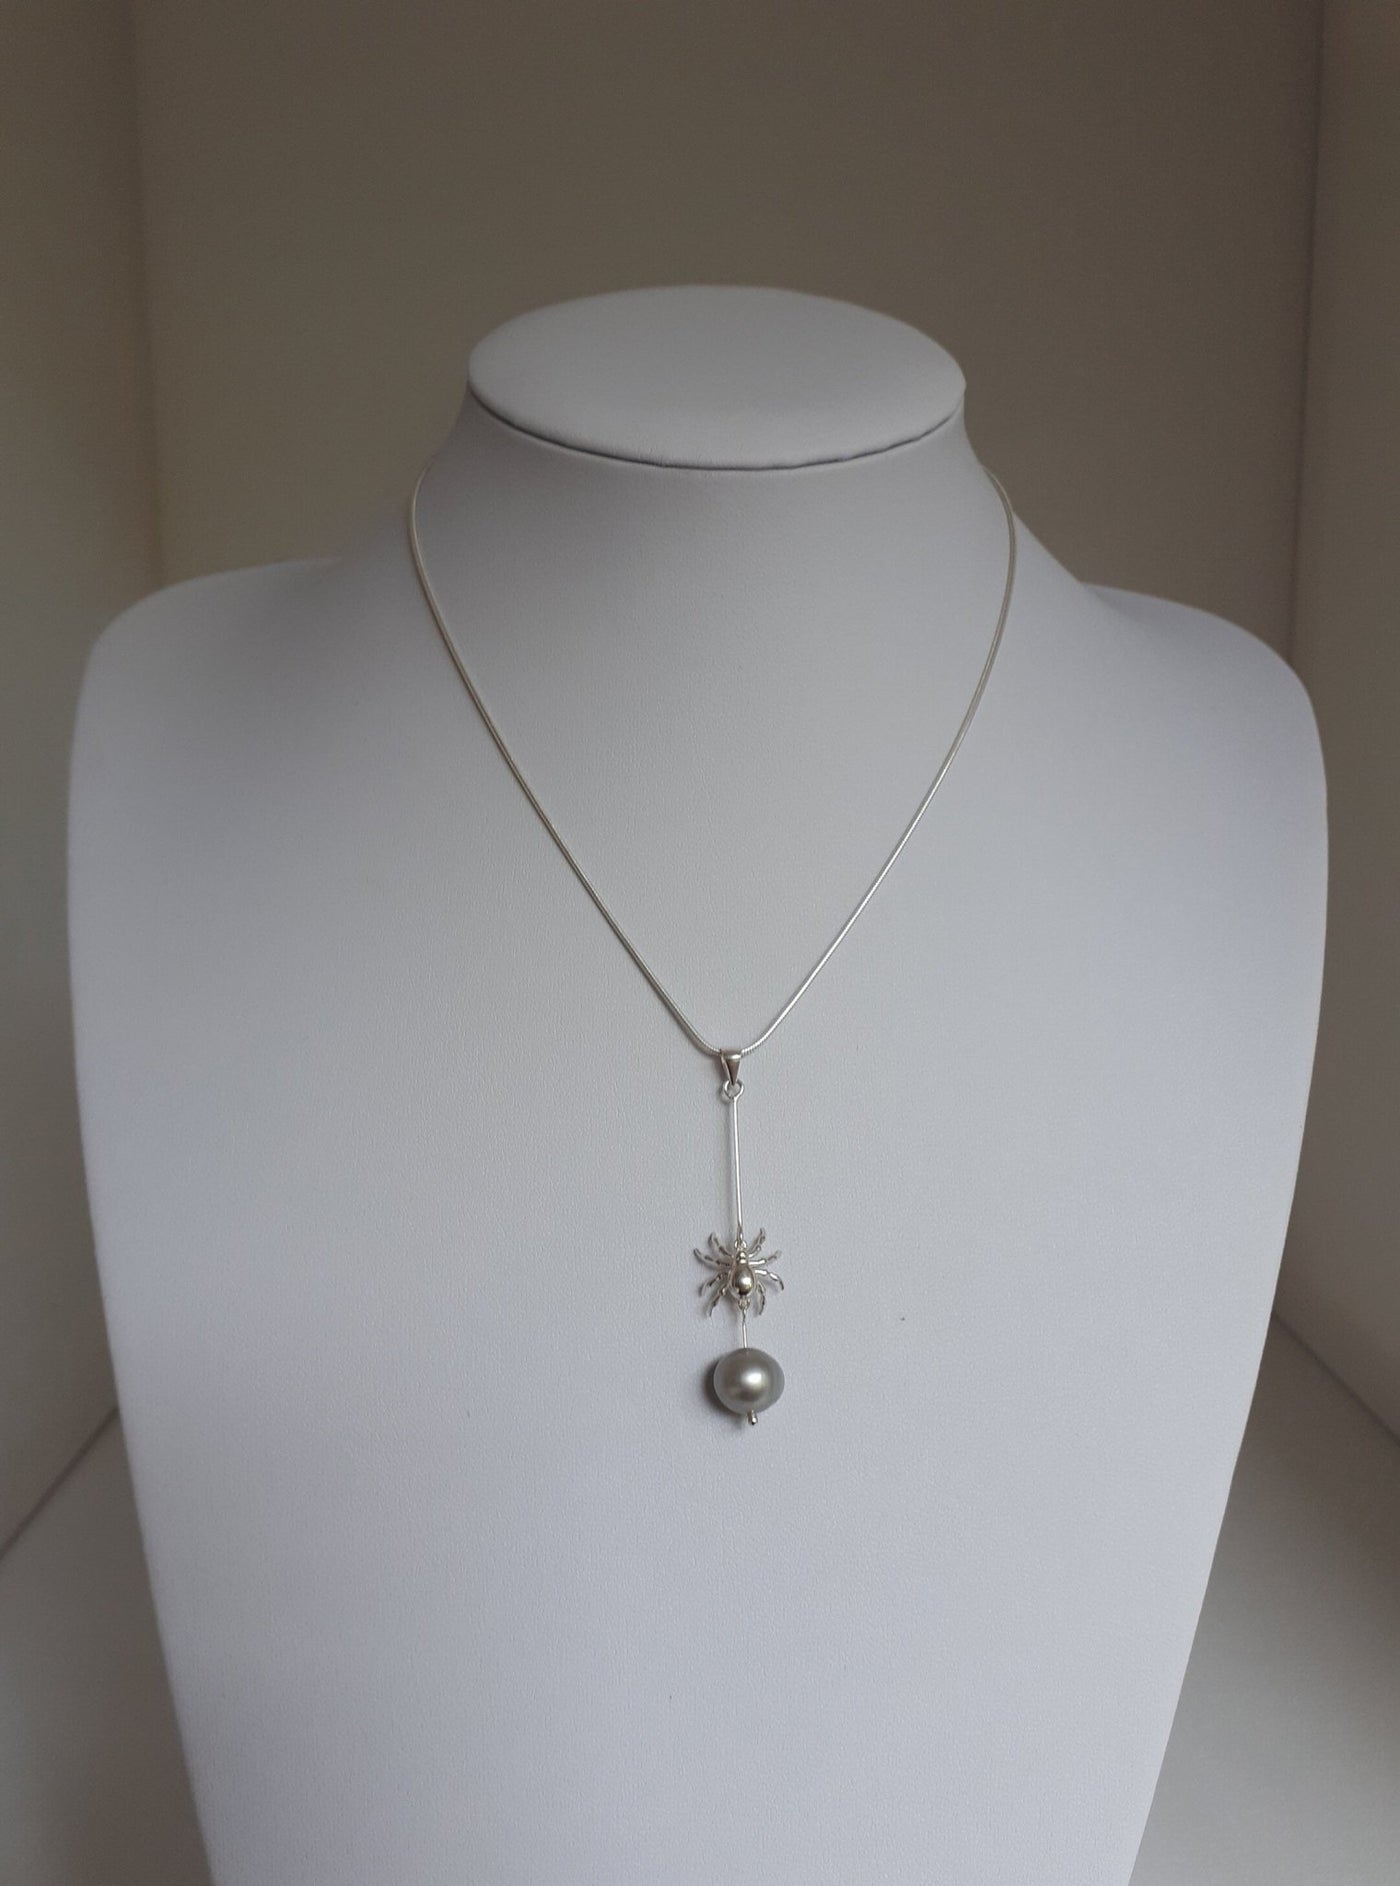 925 Sterling Silver Spider & Pearl Necklace. - JOANNE MASSEY ARTISAN JEWELLERY